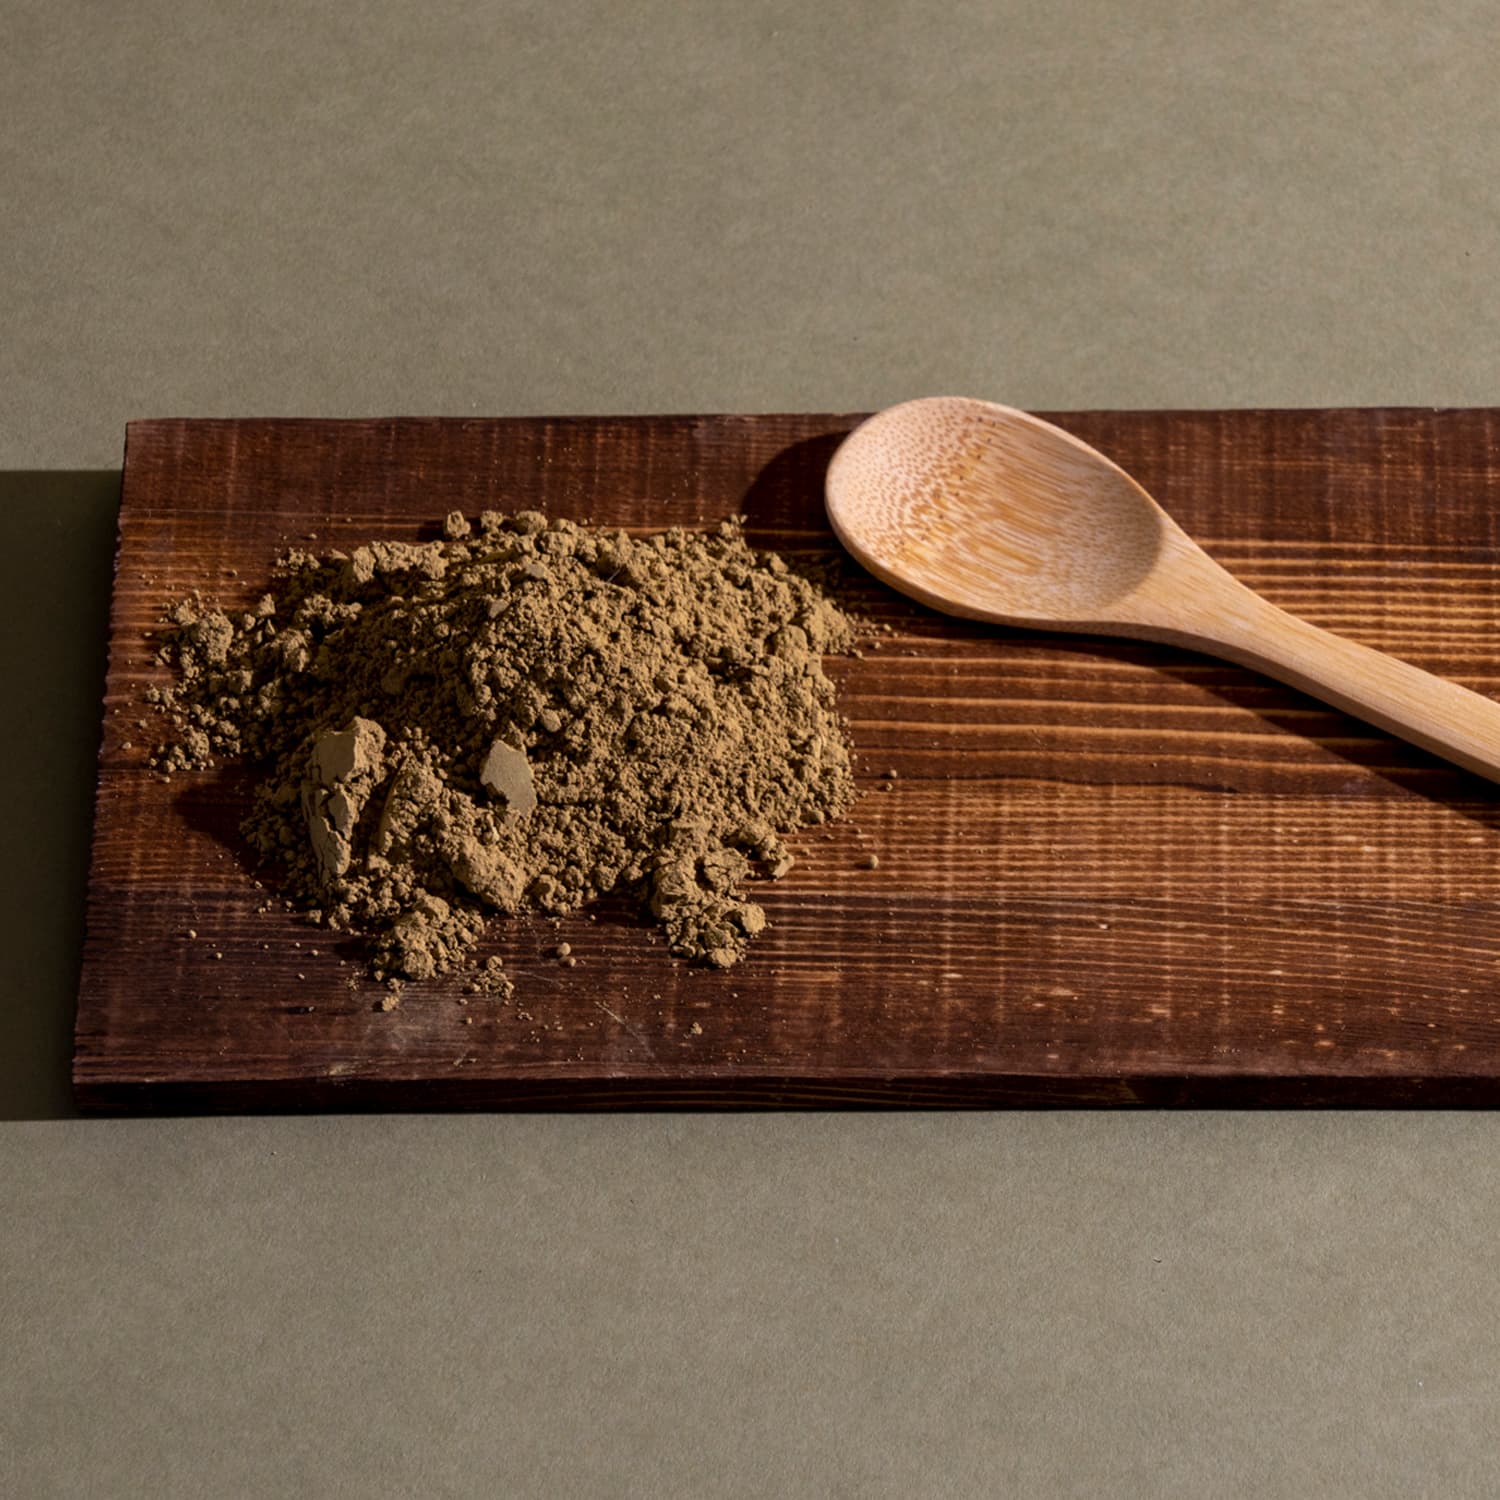 A spoon and brown powder on a wooden cutting board